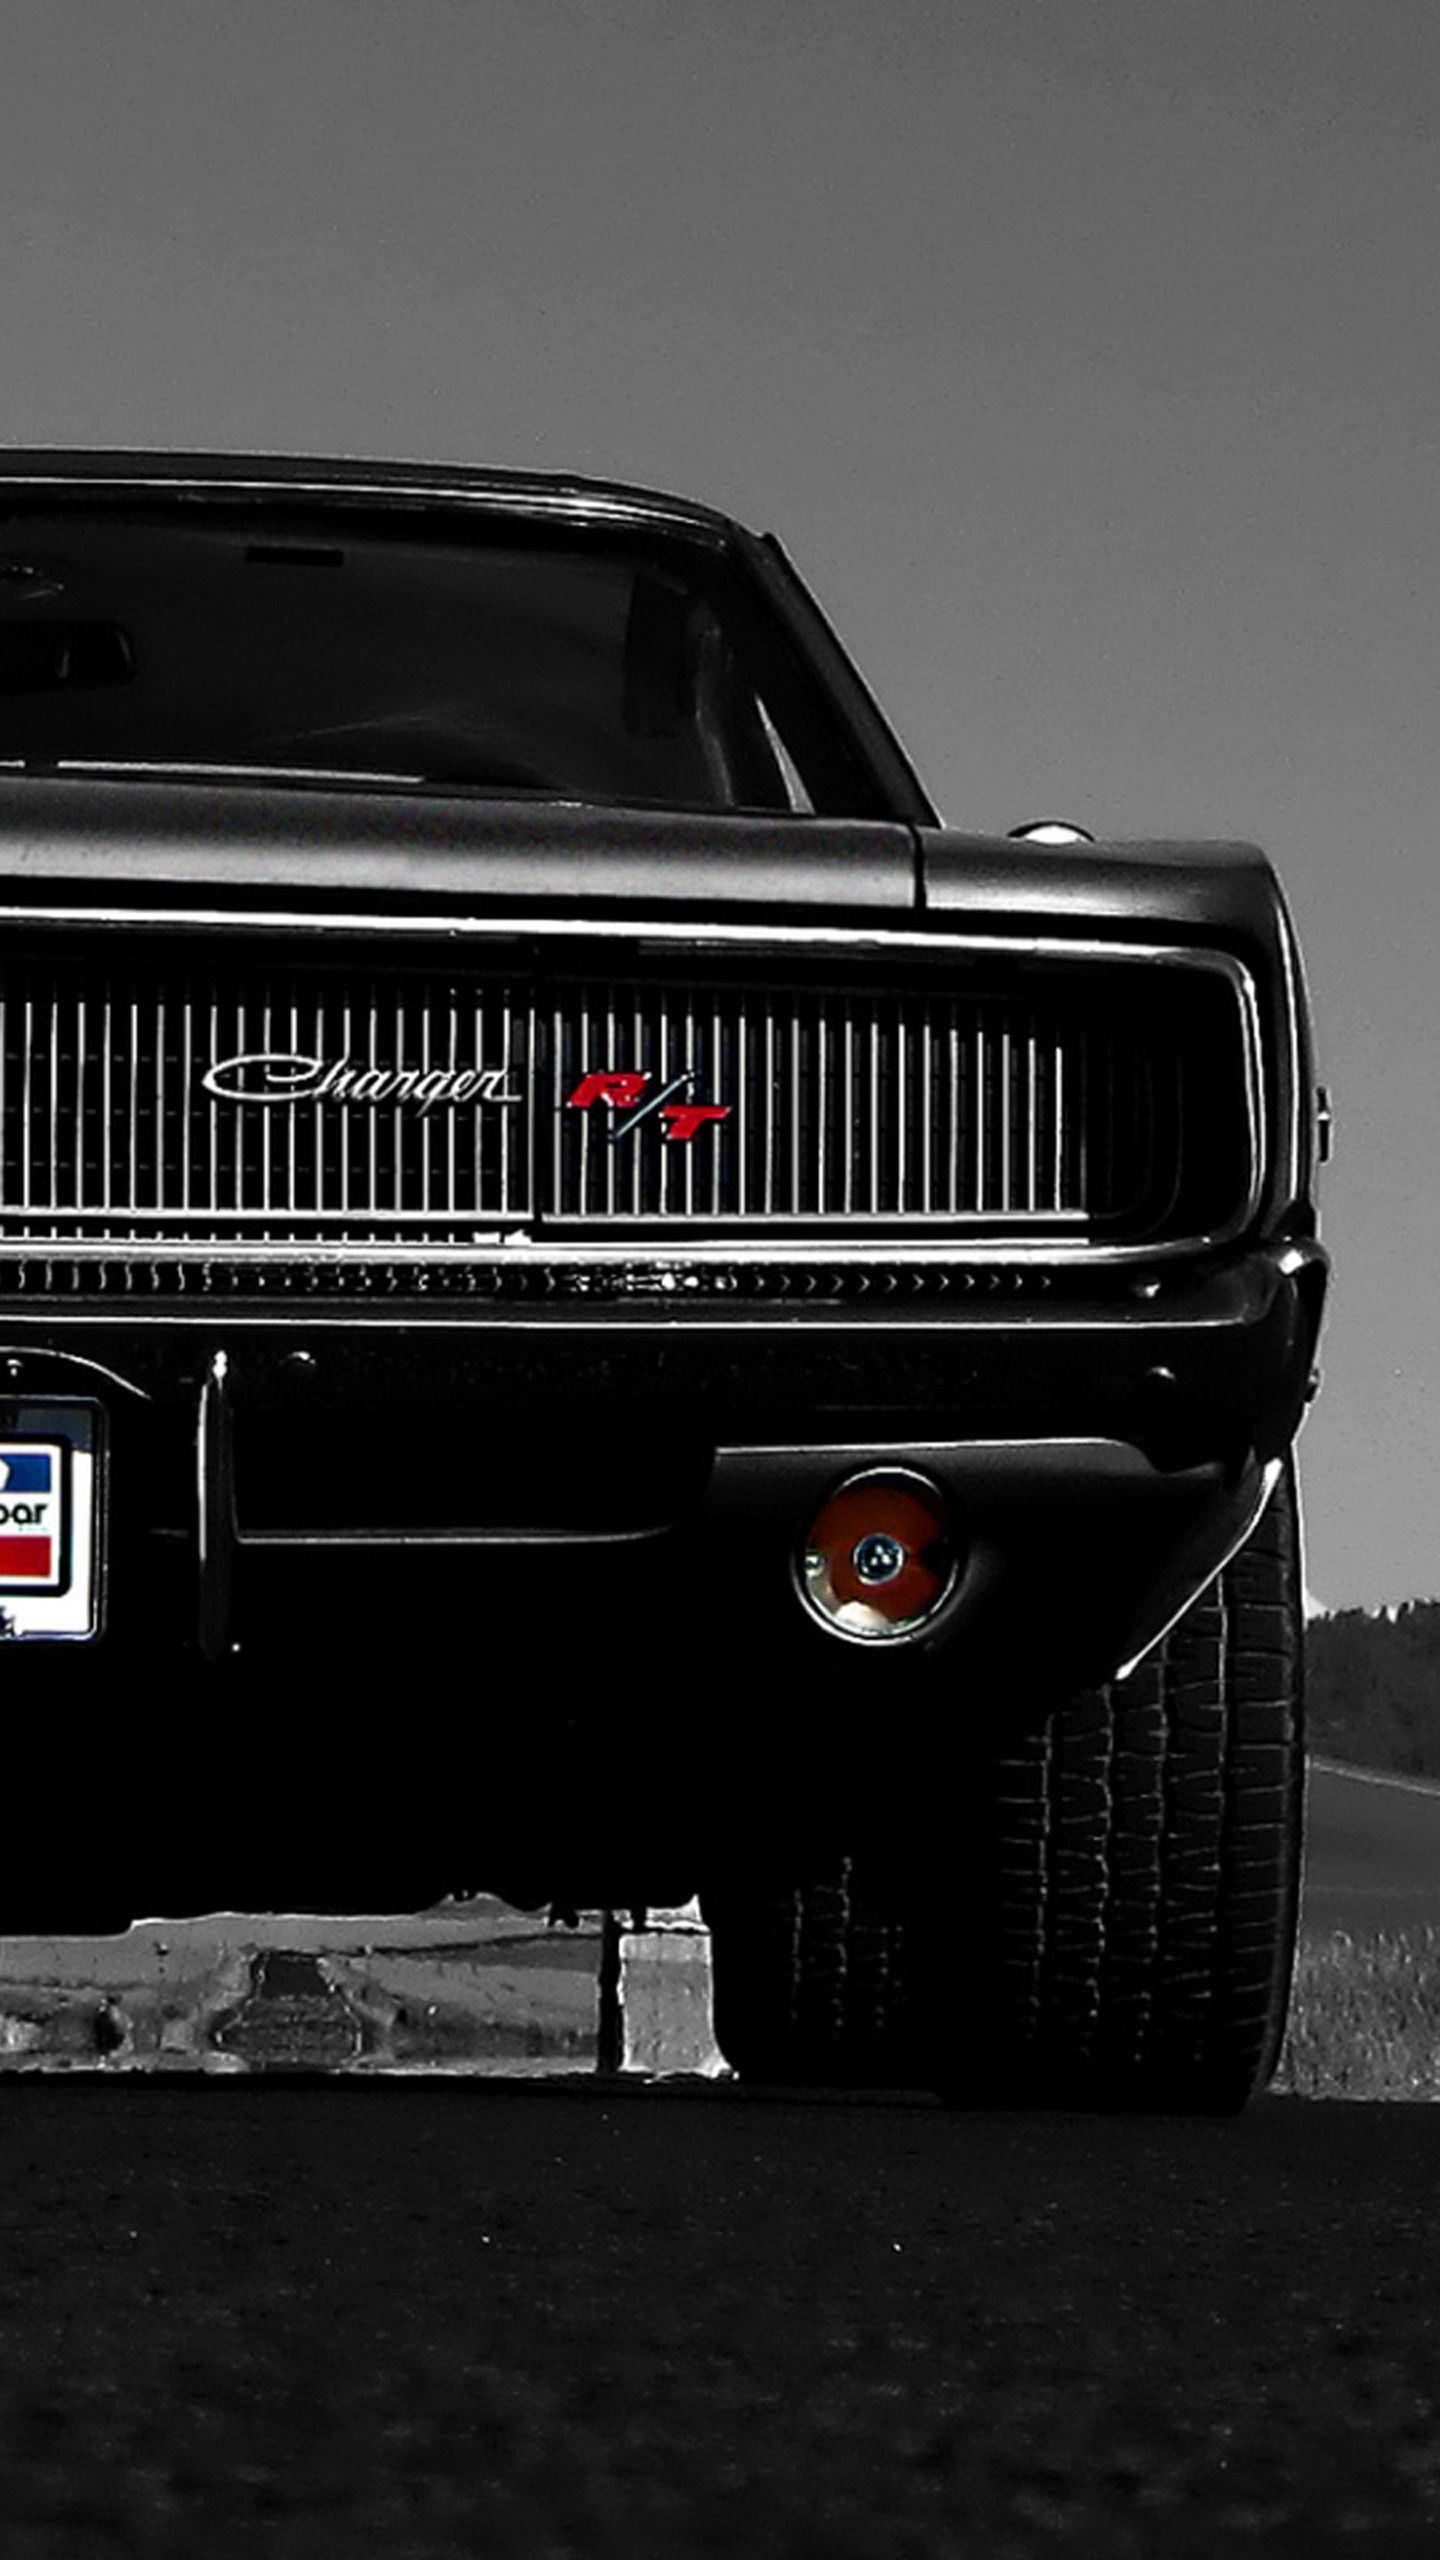 Dodge charger rt Samsung Galaxy Note4 Wallpapers 14402560